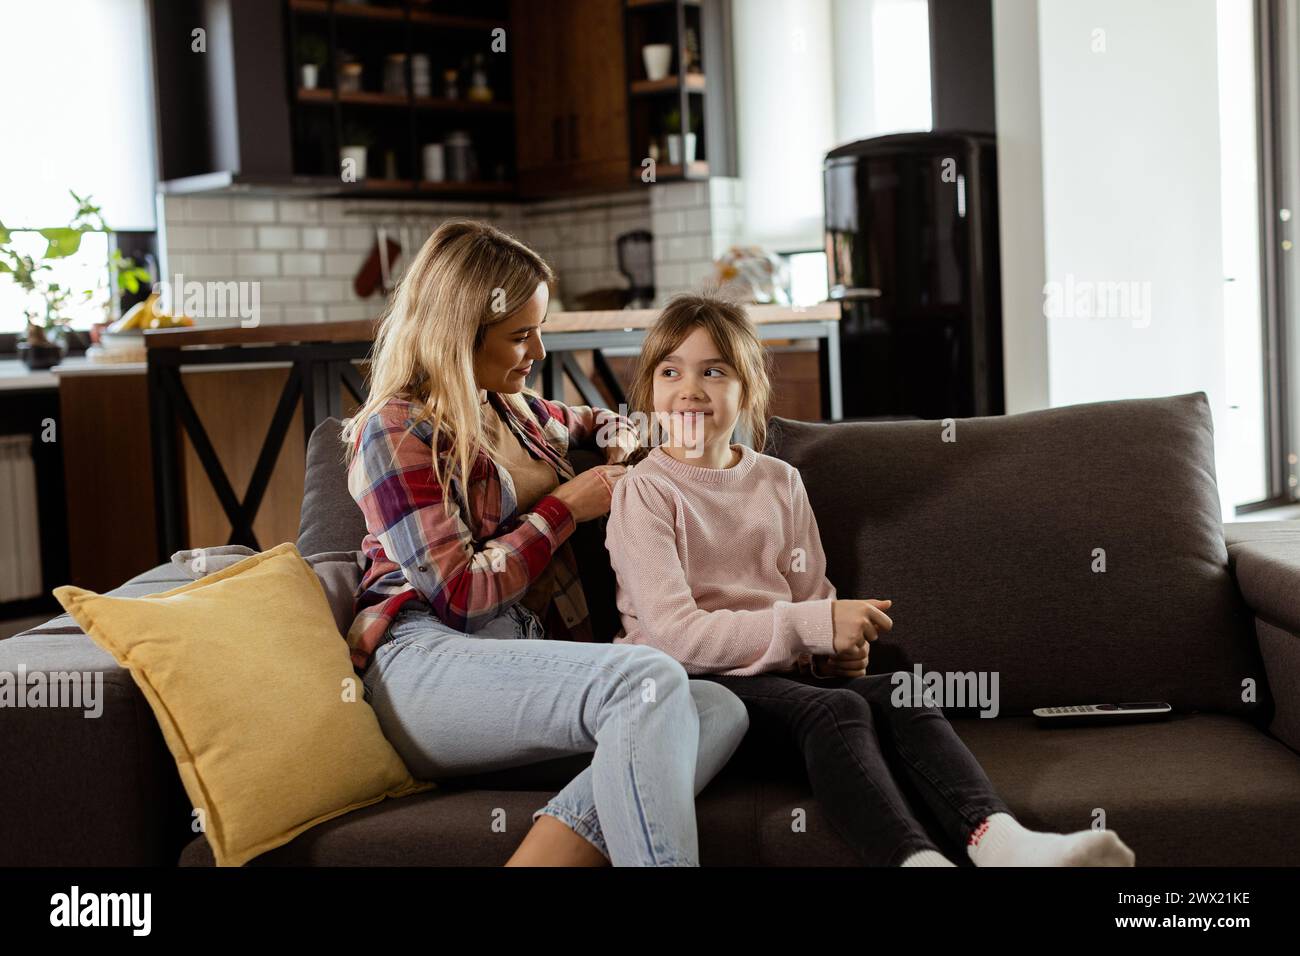 Gentle touch enriches a quiet morning as a mother intricately weaves her daughters hair on the living room sofa Stock Photo